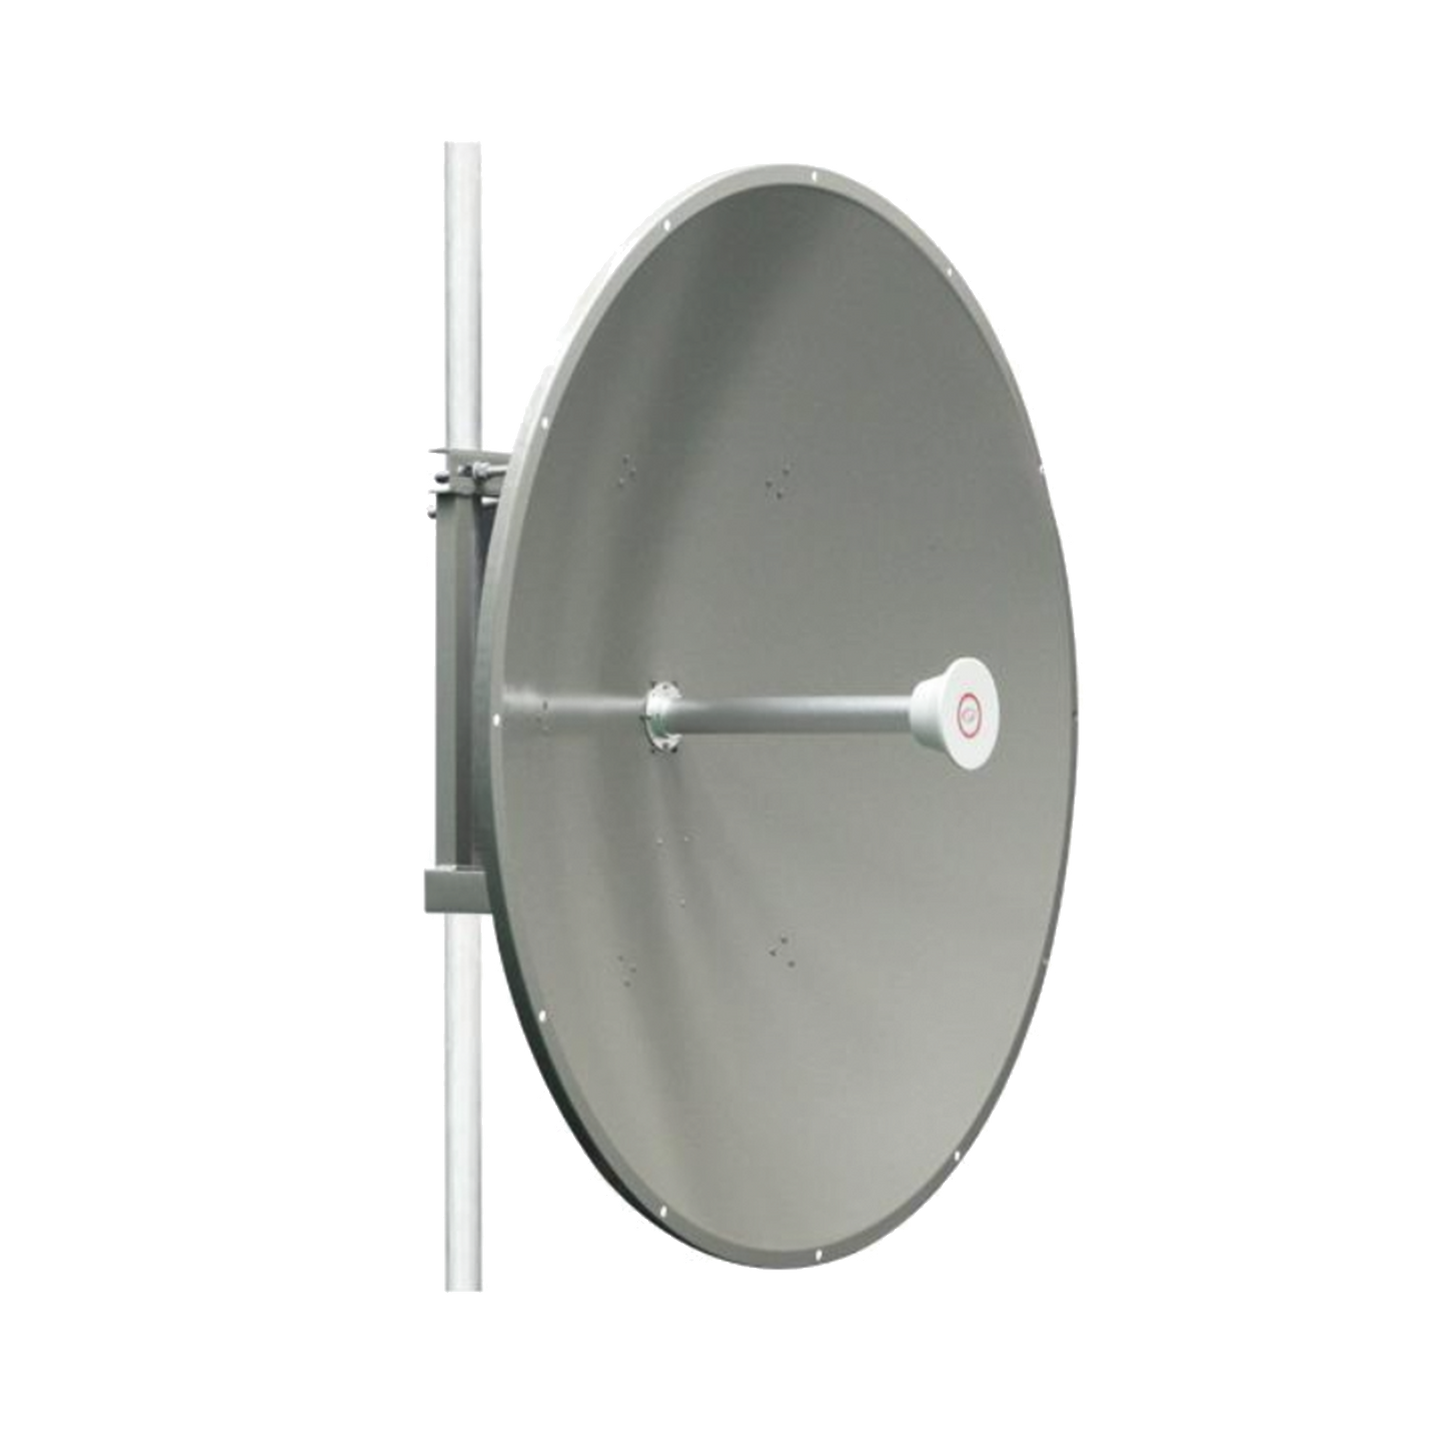 Directional antenna, 36 dBi gain, frequency range (5.1 - 7 GHz), 2 N-female connectors, includes mounting for tower or mast